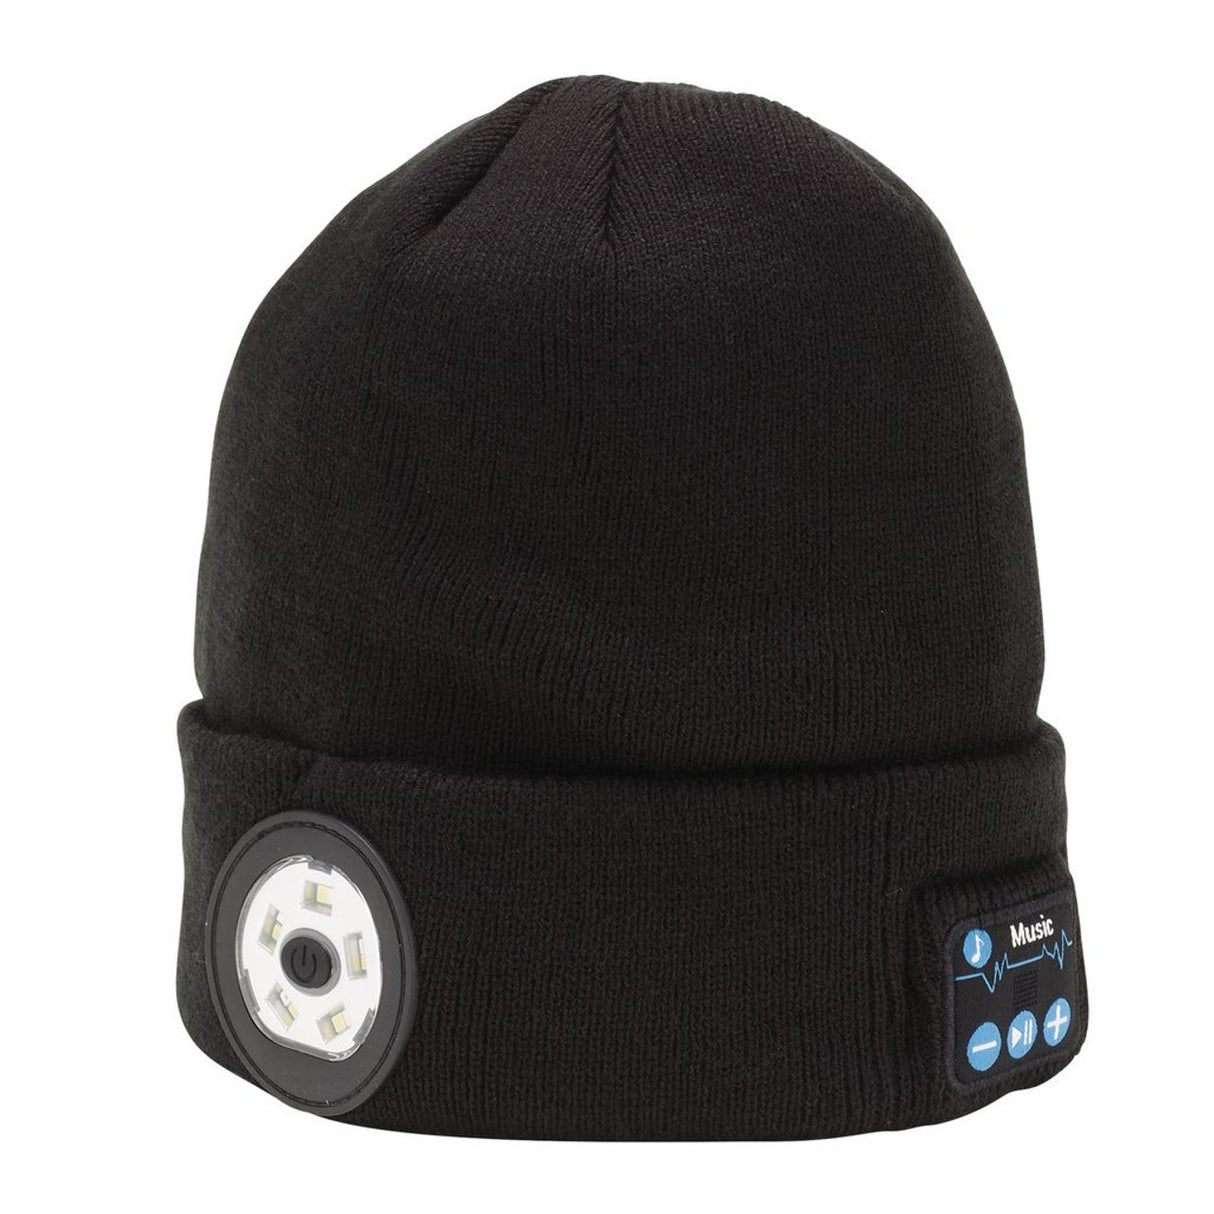 Draper Tools Smart Wireless Rechargeable Beanie With Led Head Torch And Usb Charging Cable, Black, One Size